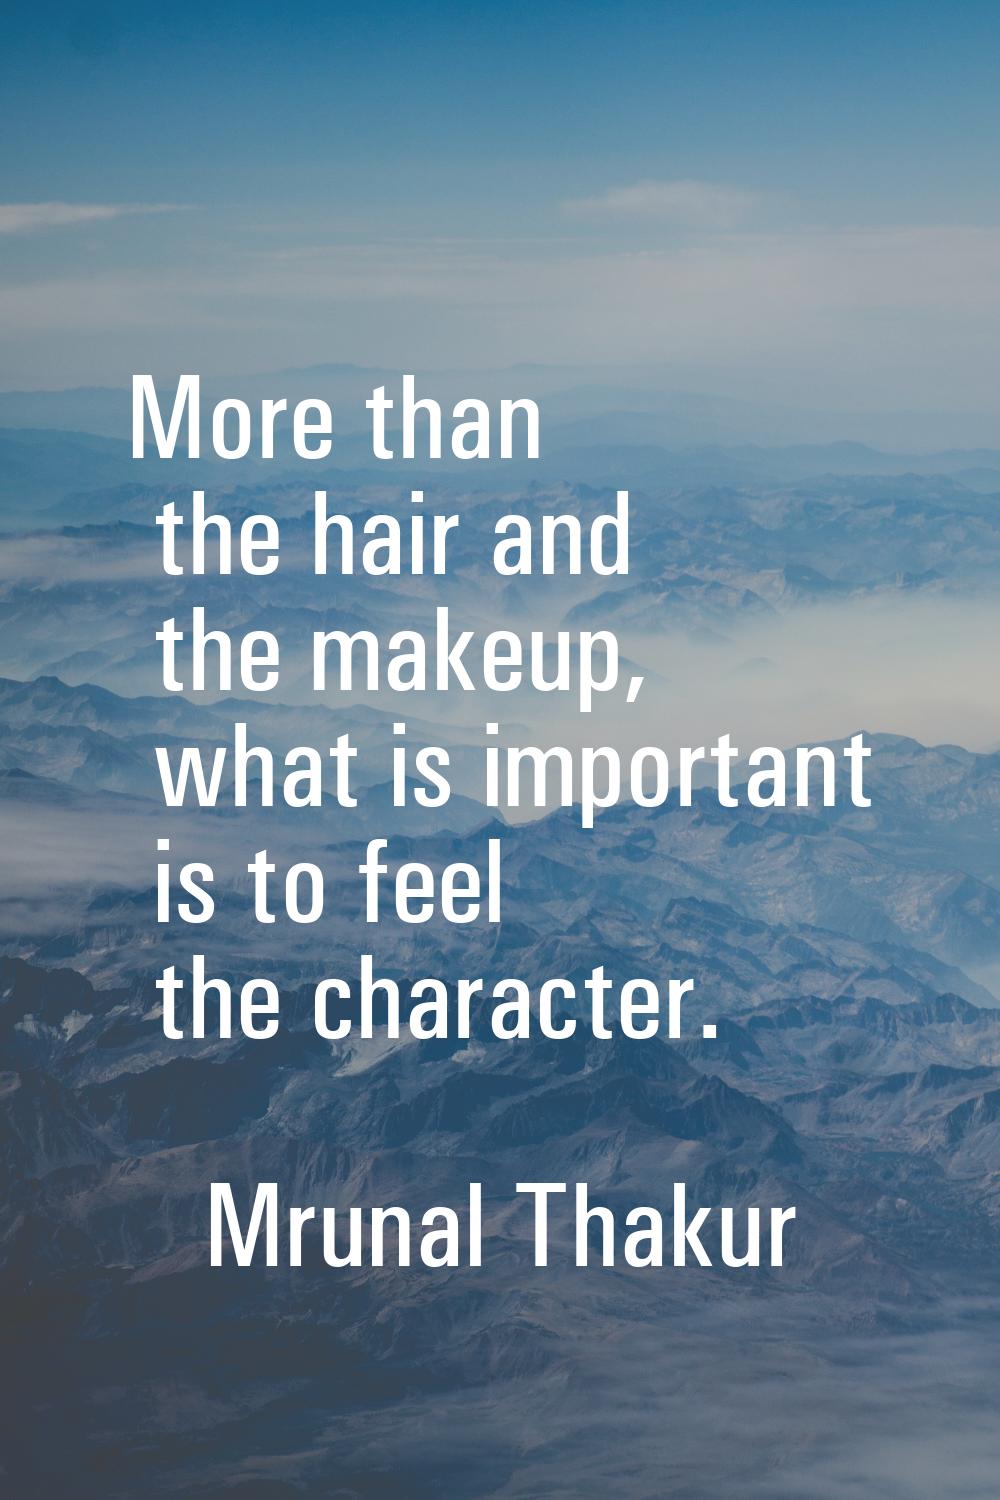 More than the hair and the makeup, what is important is to feel the character.